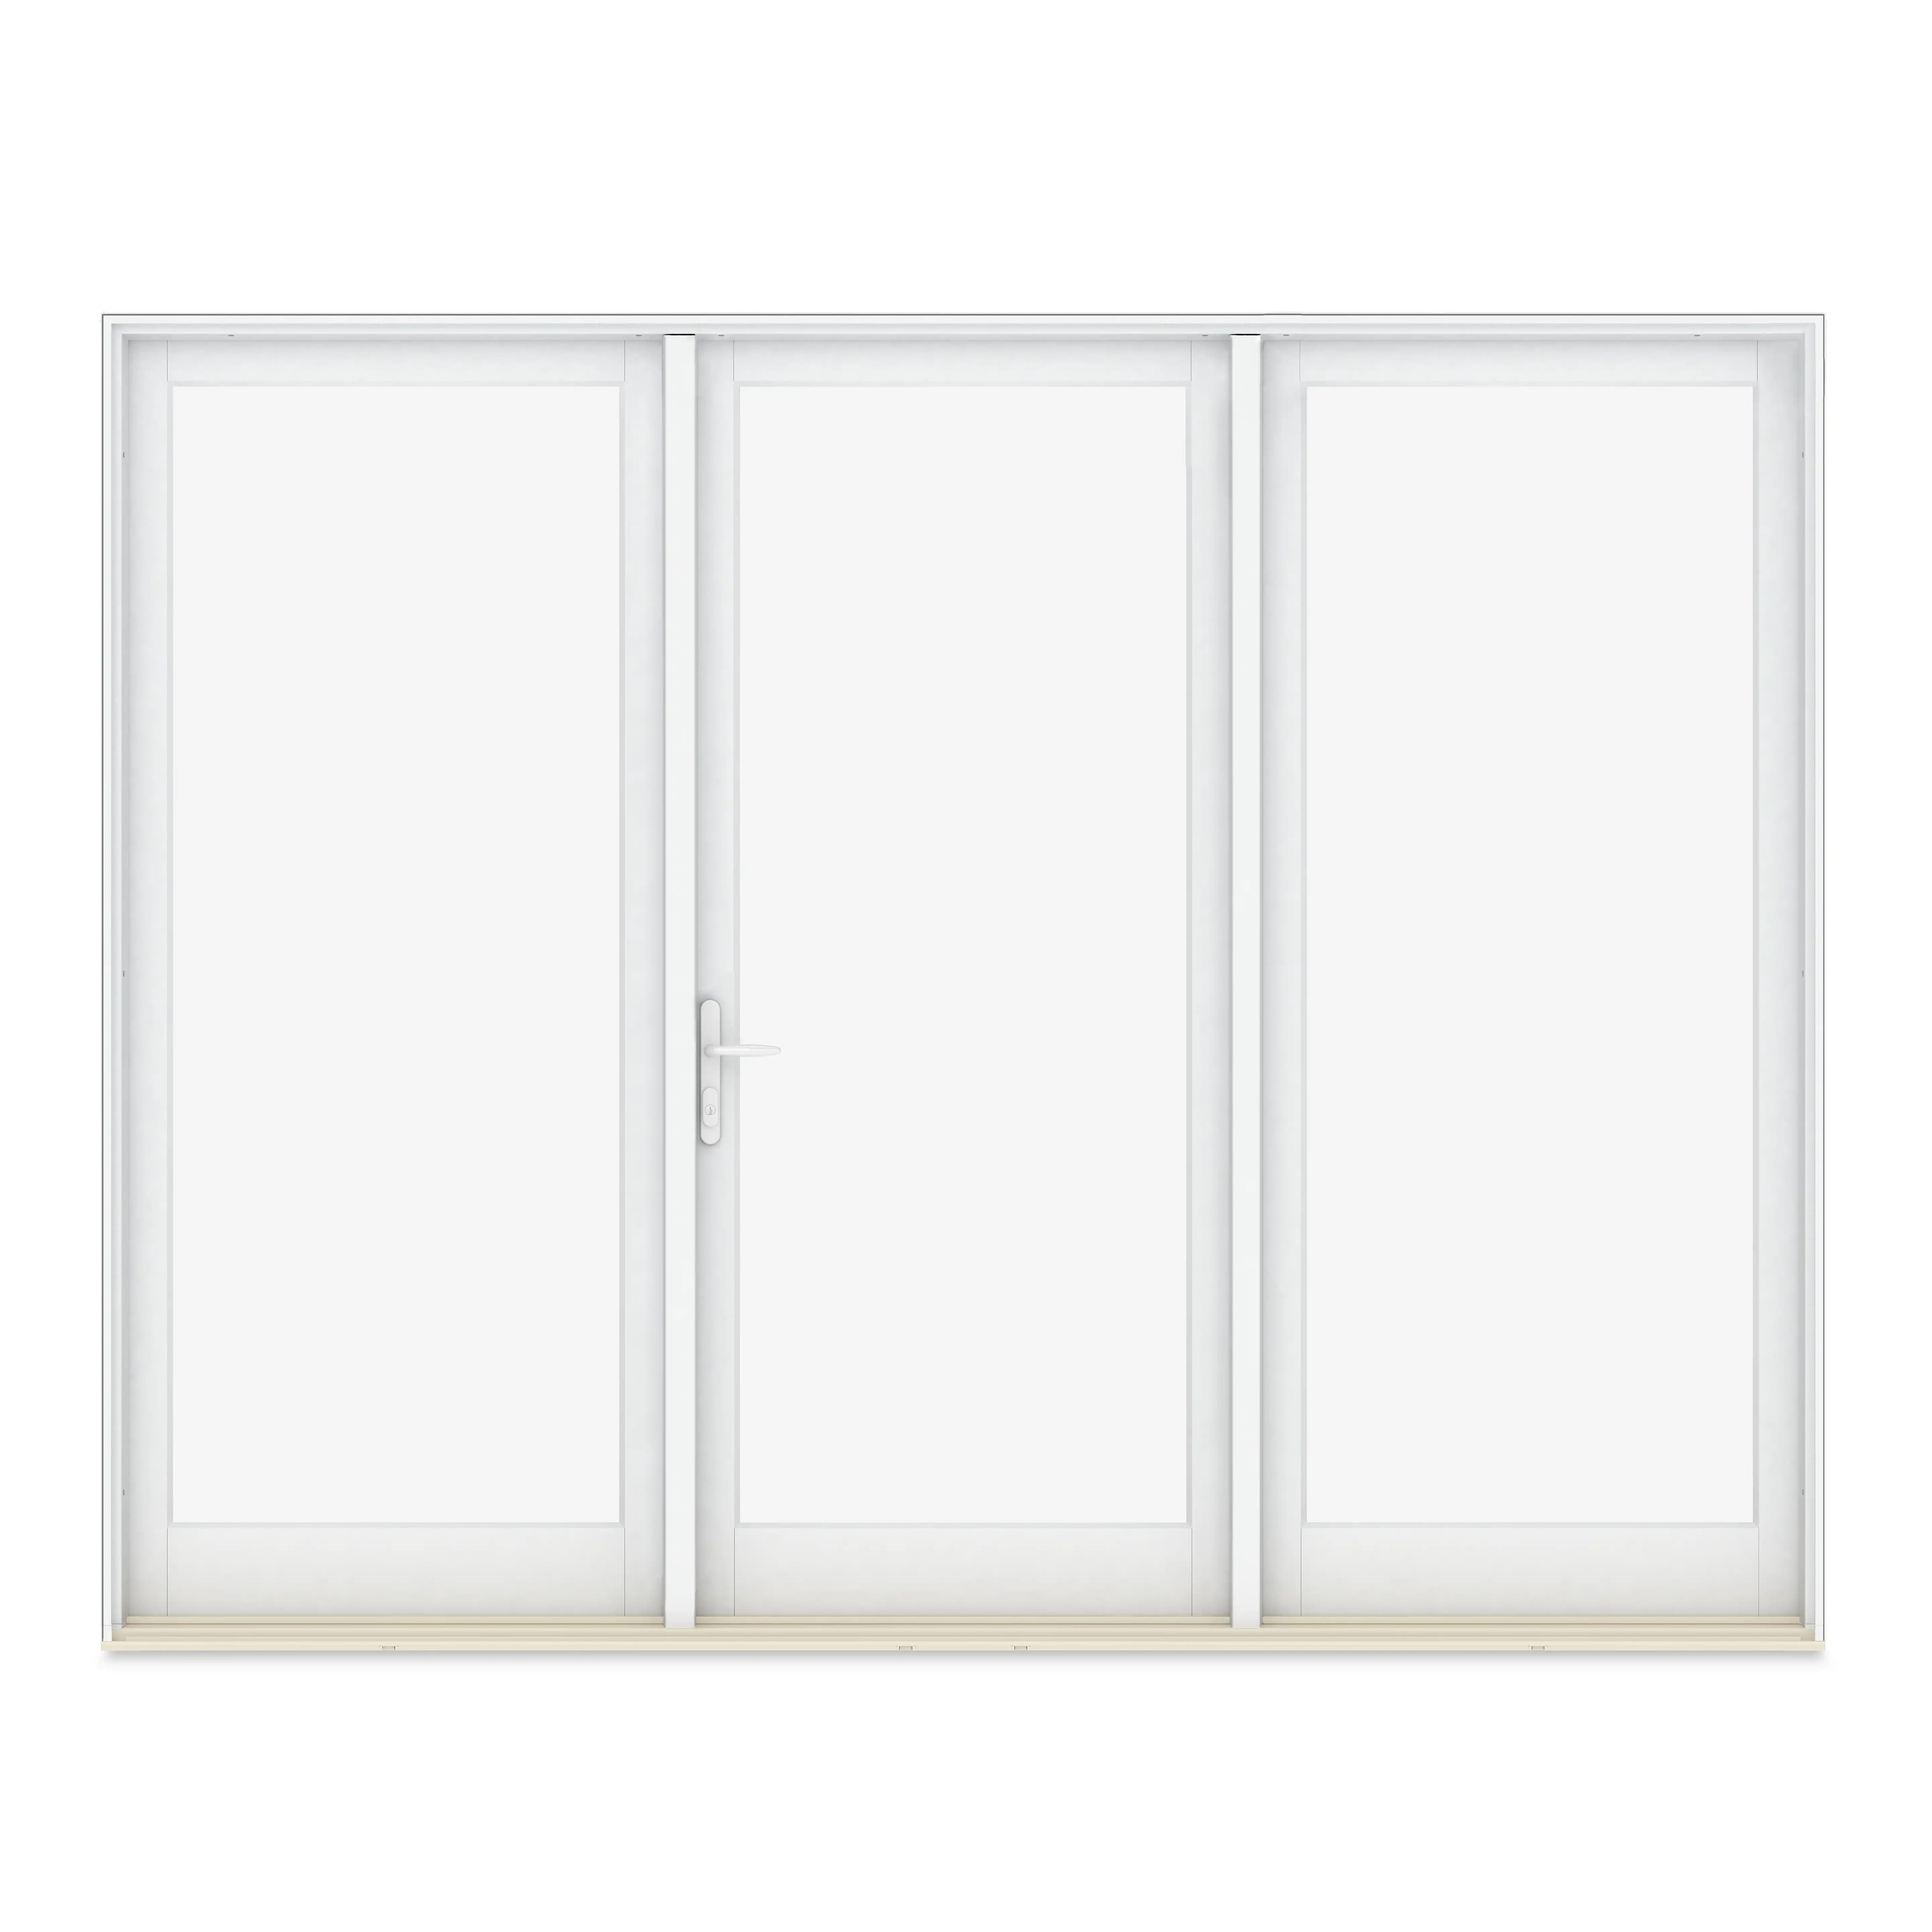 A white three-panel Marvin Replacement Inswing French door with an operable middle unit.